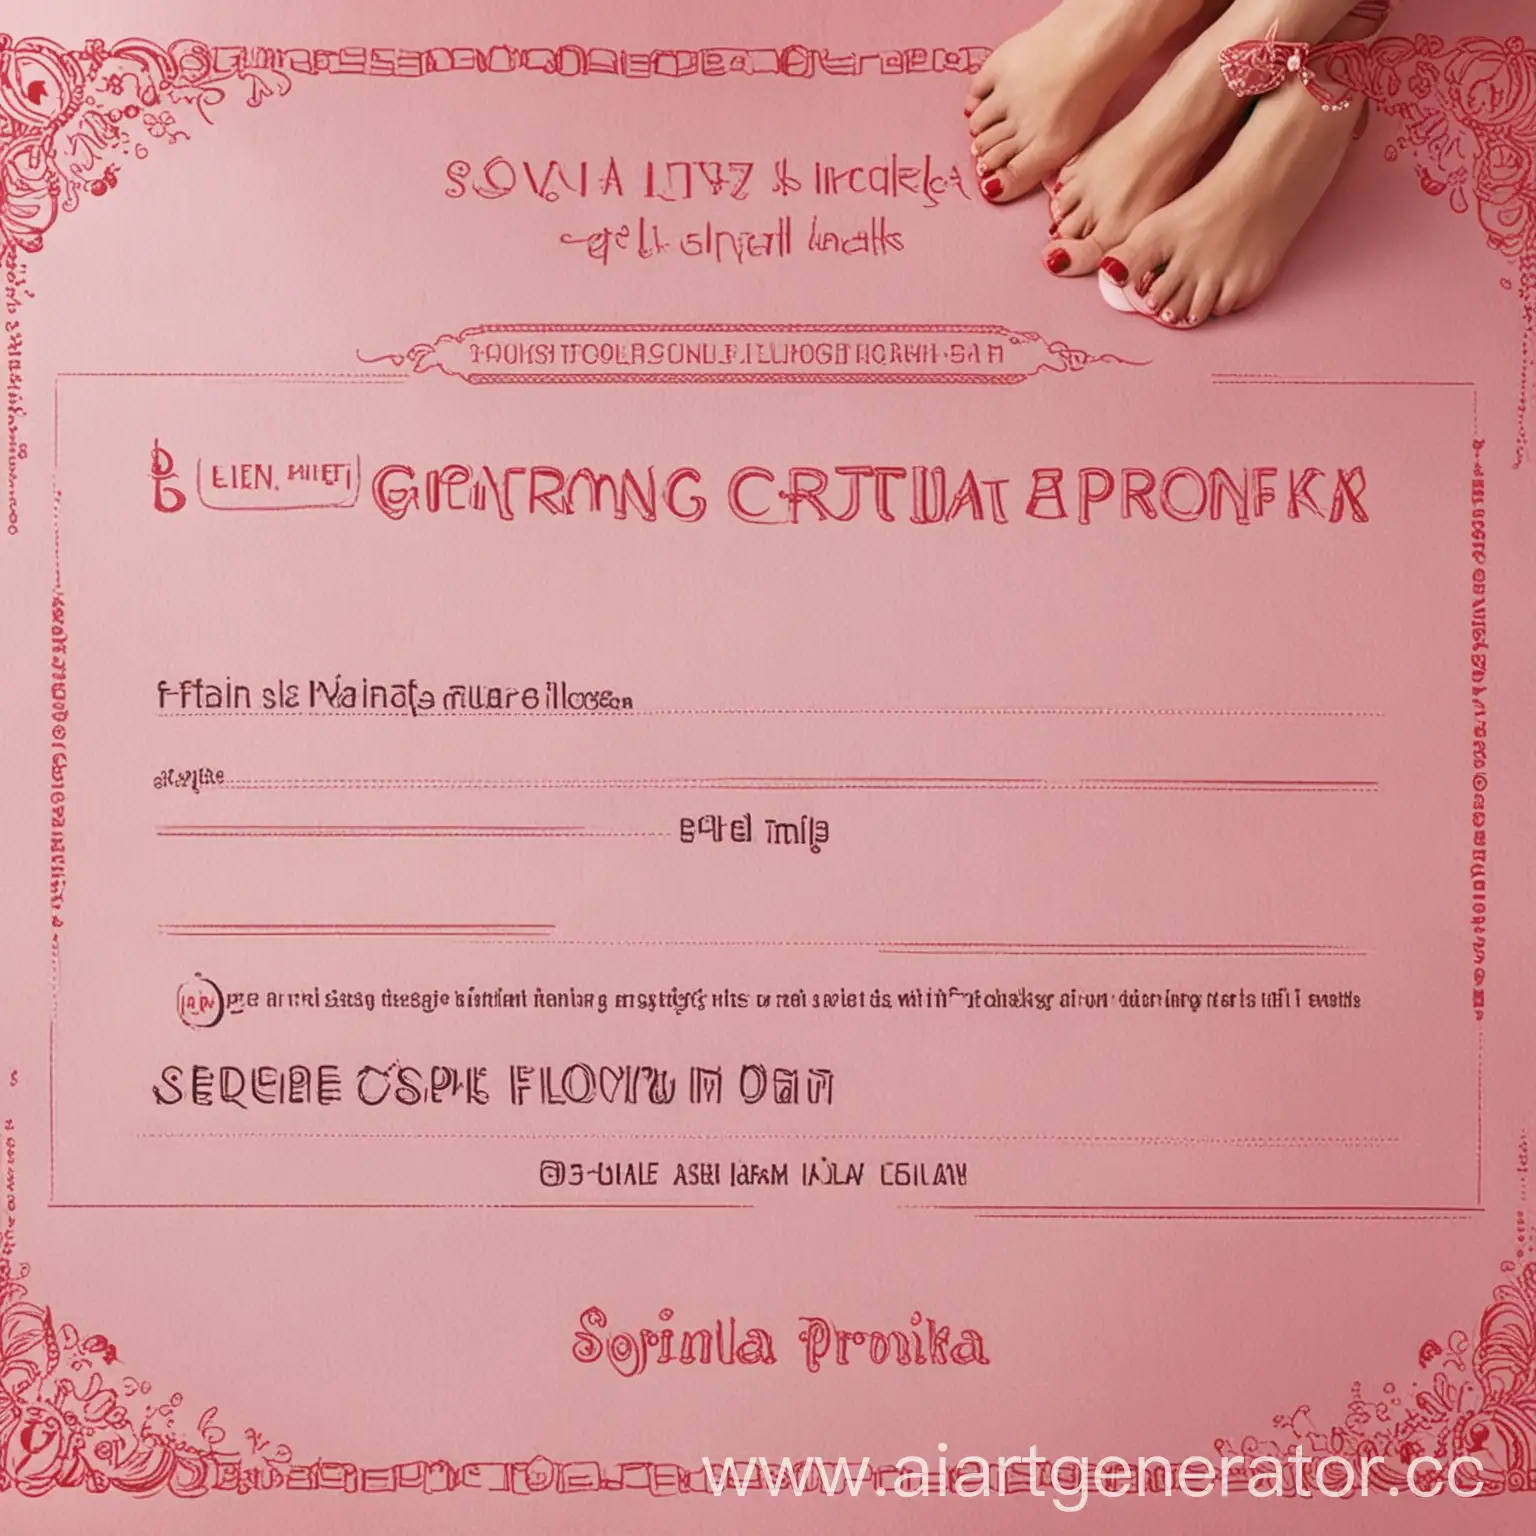 Gift-Certificate-for-Free-Foot-Licking-at-Salon-Lizpolizpatka-Sofia-Pronyinas-Exclusive-Yearly-Treat